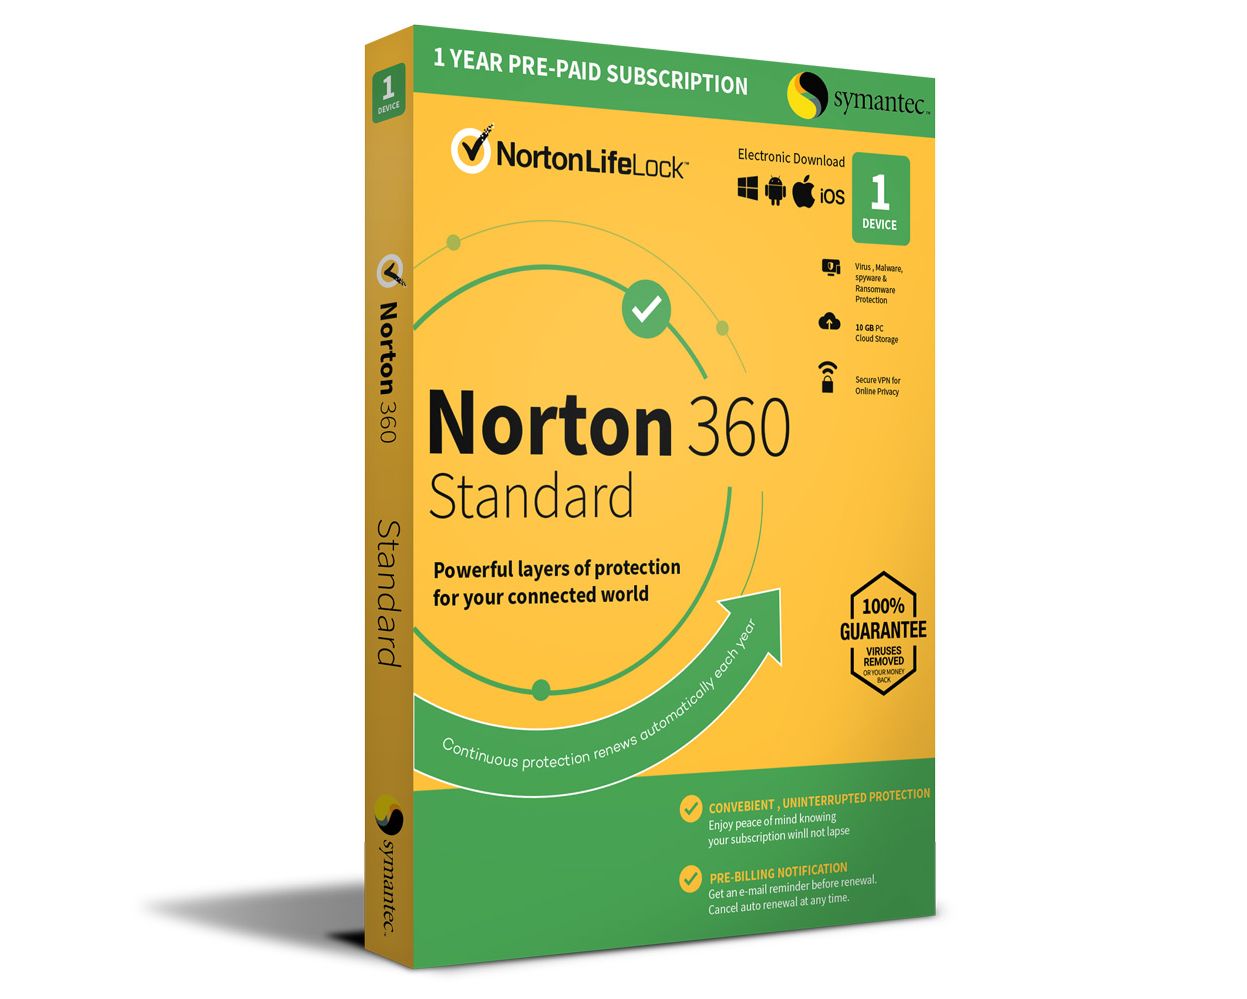 Norton 360 Standard Complete Protection at an Affordable Price